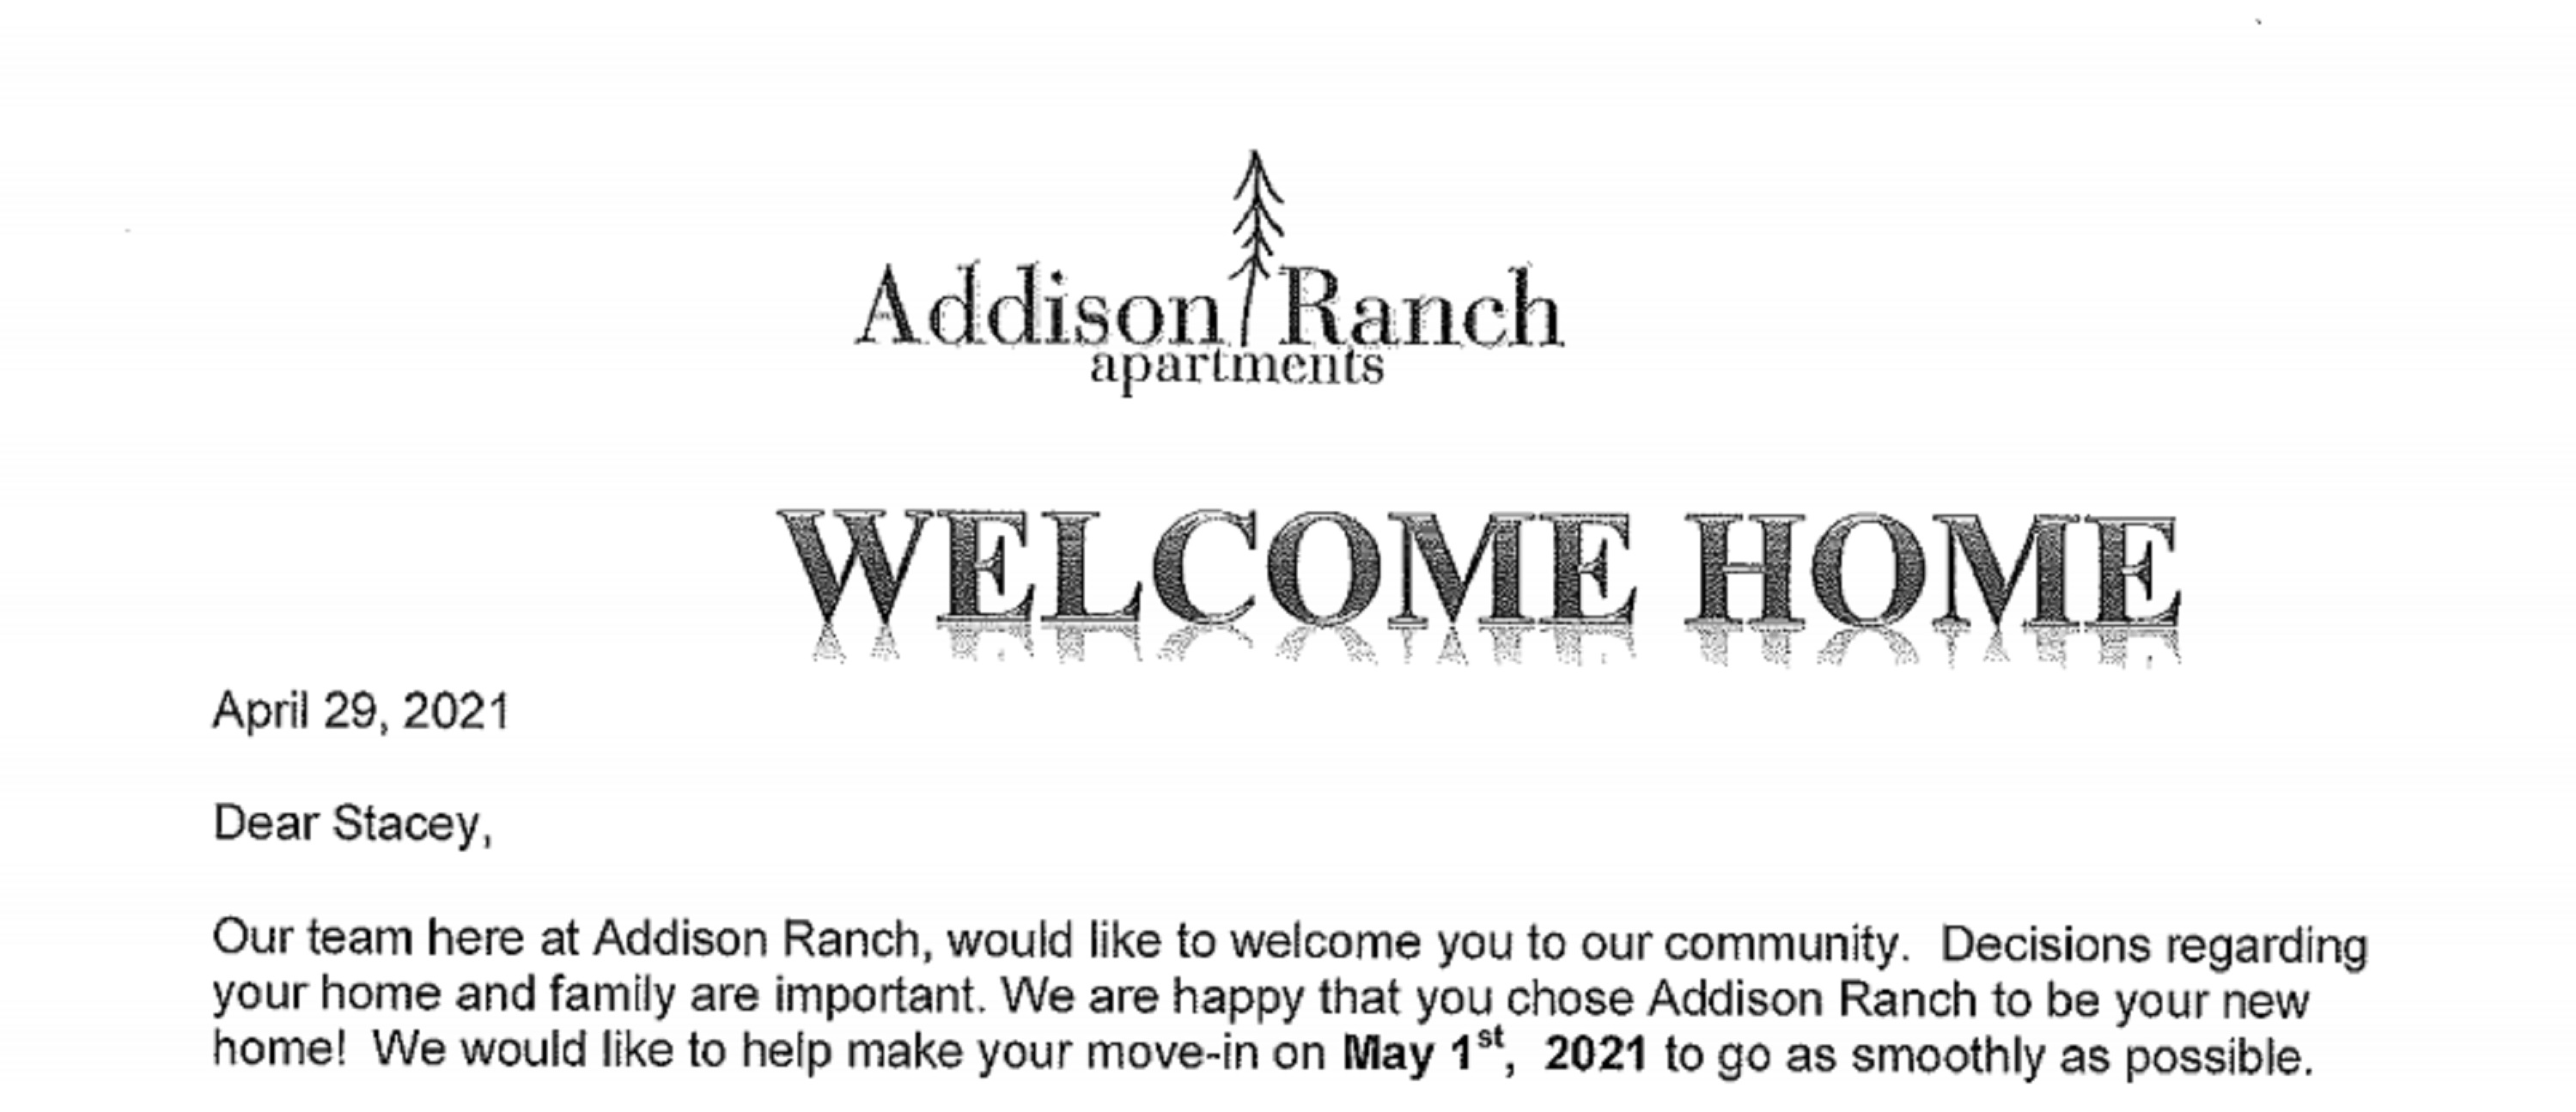 Screen cap of welcome letter